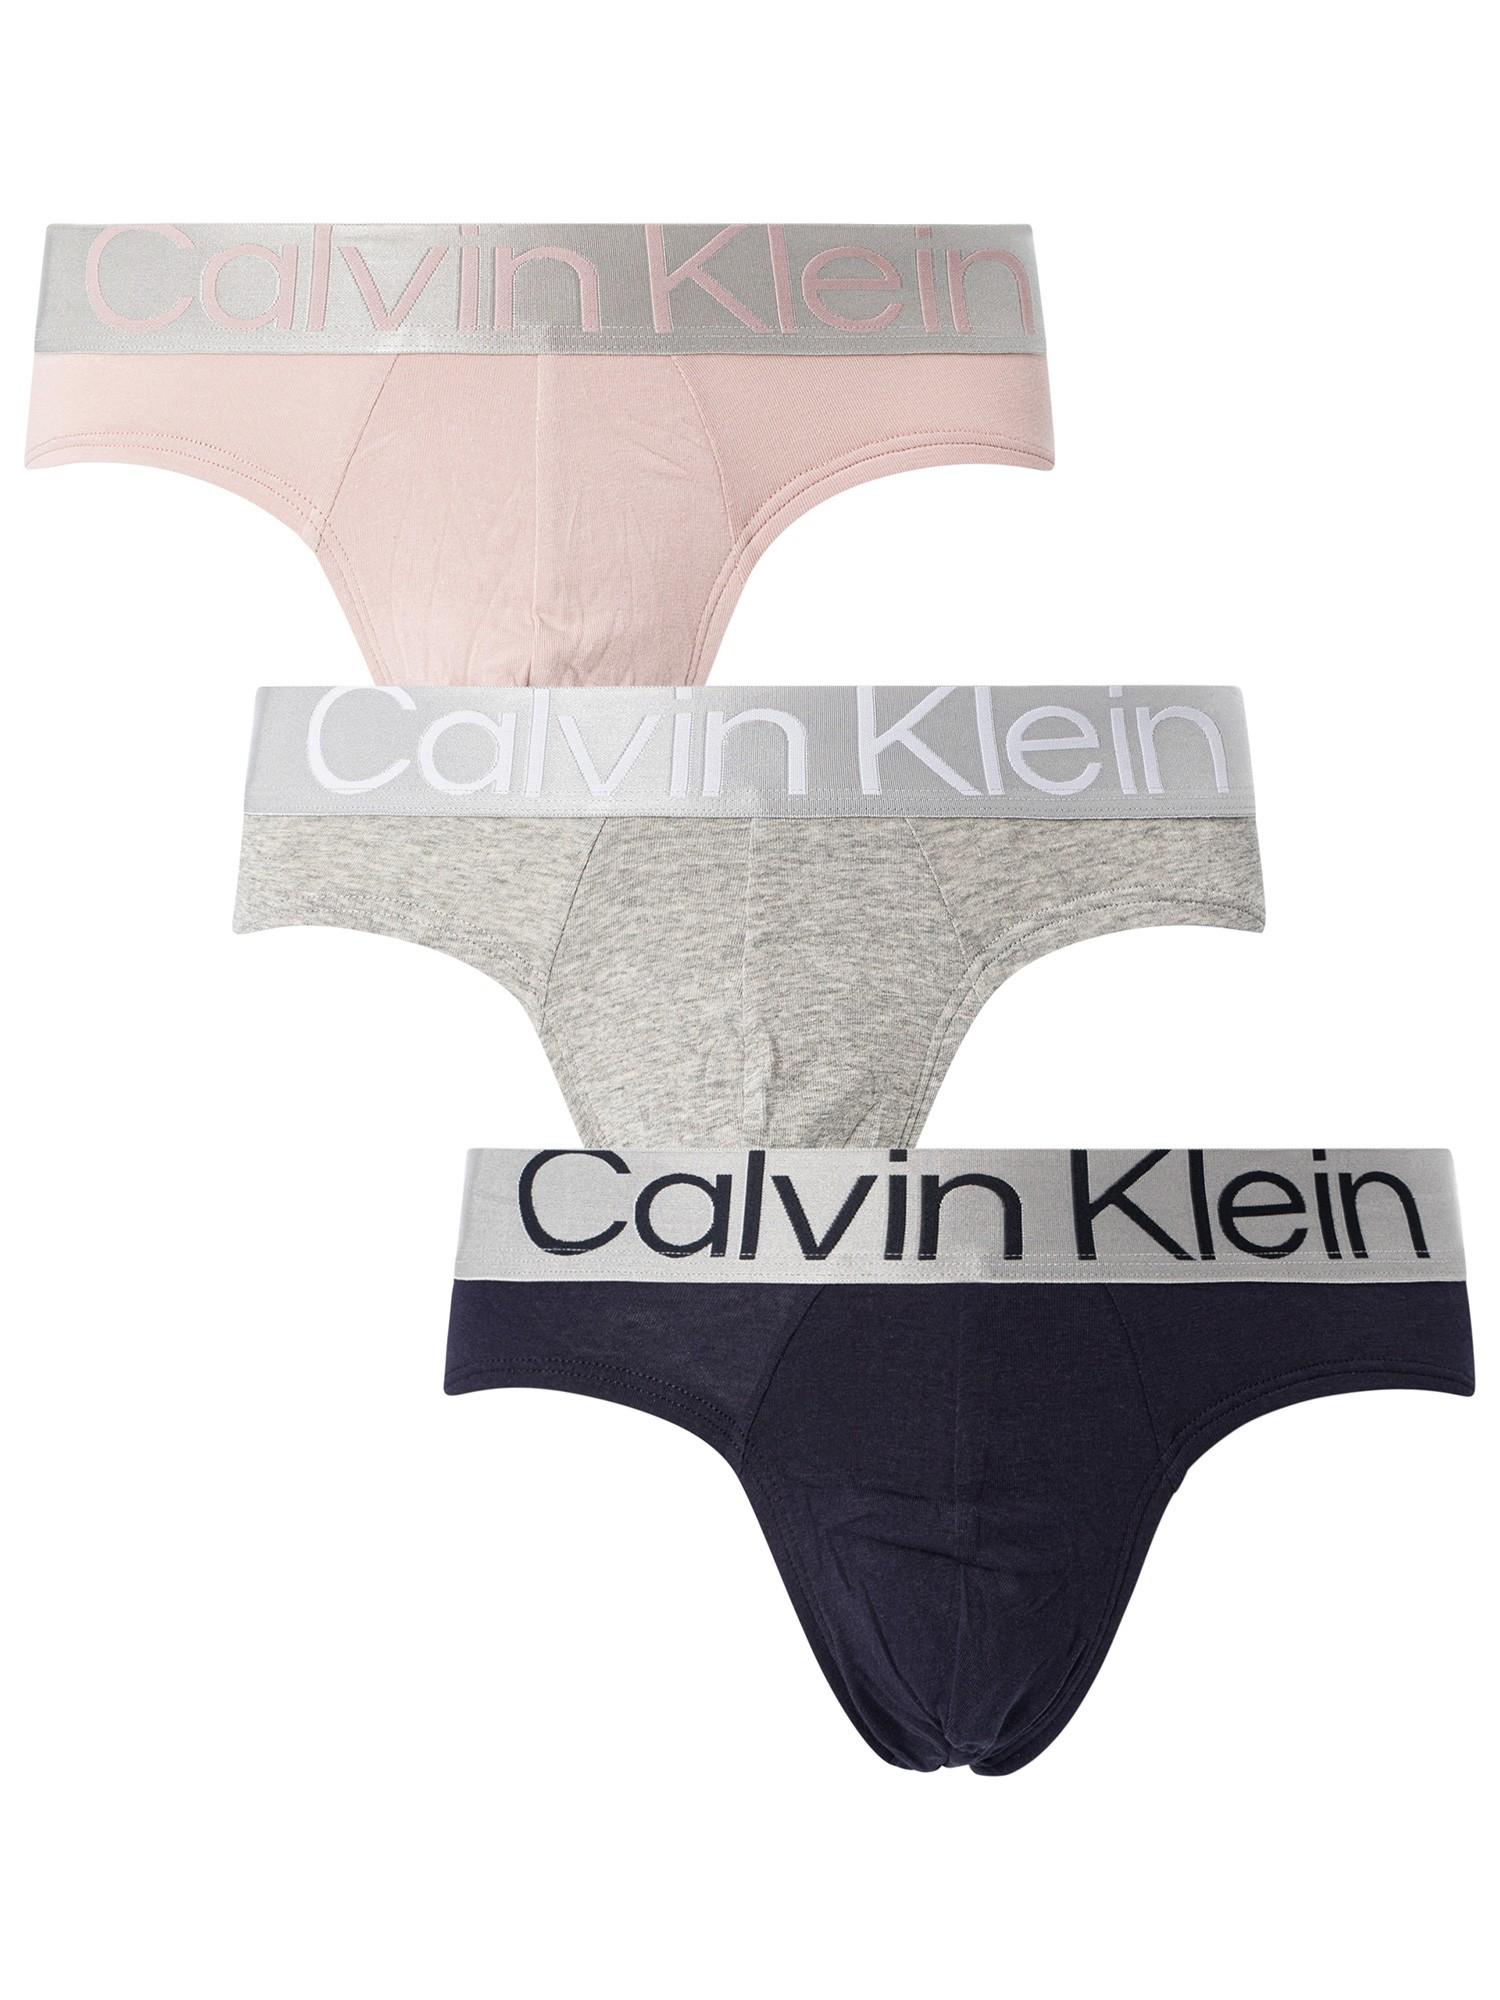 Calvin Klein Reconsidered Steel Micro Hip Brief 3-Pack Black NB3073-902 -  Free Shipping at LASC